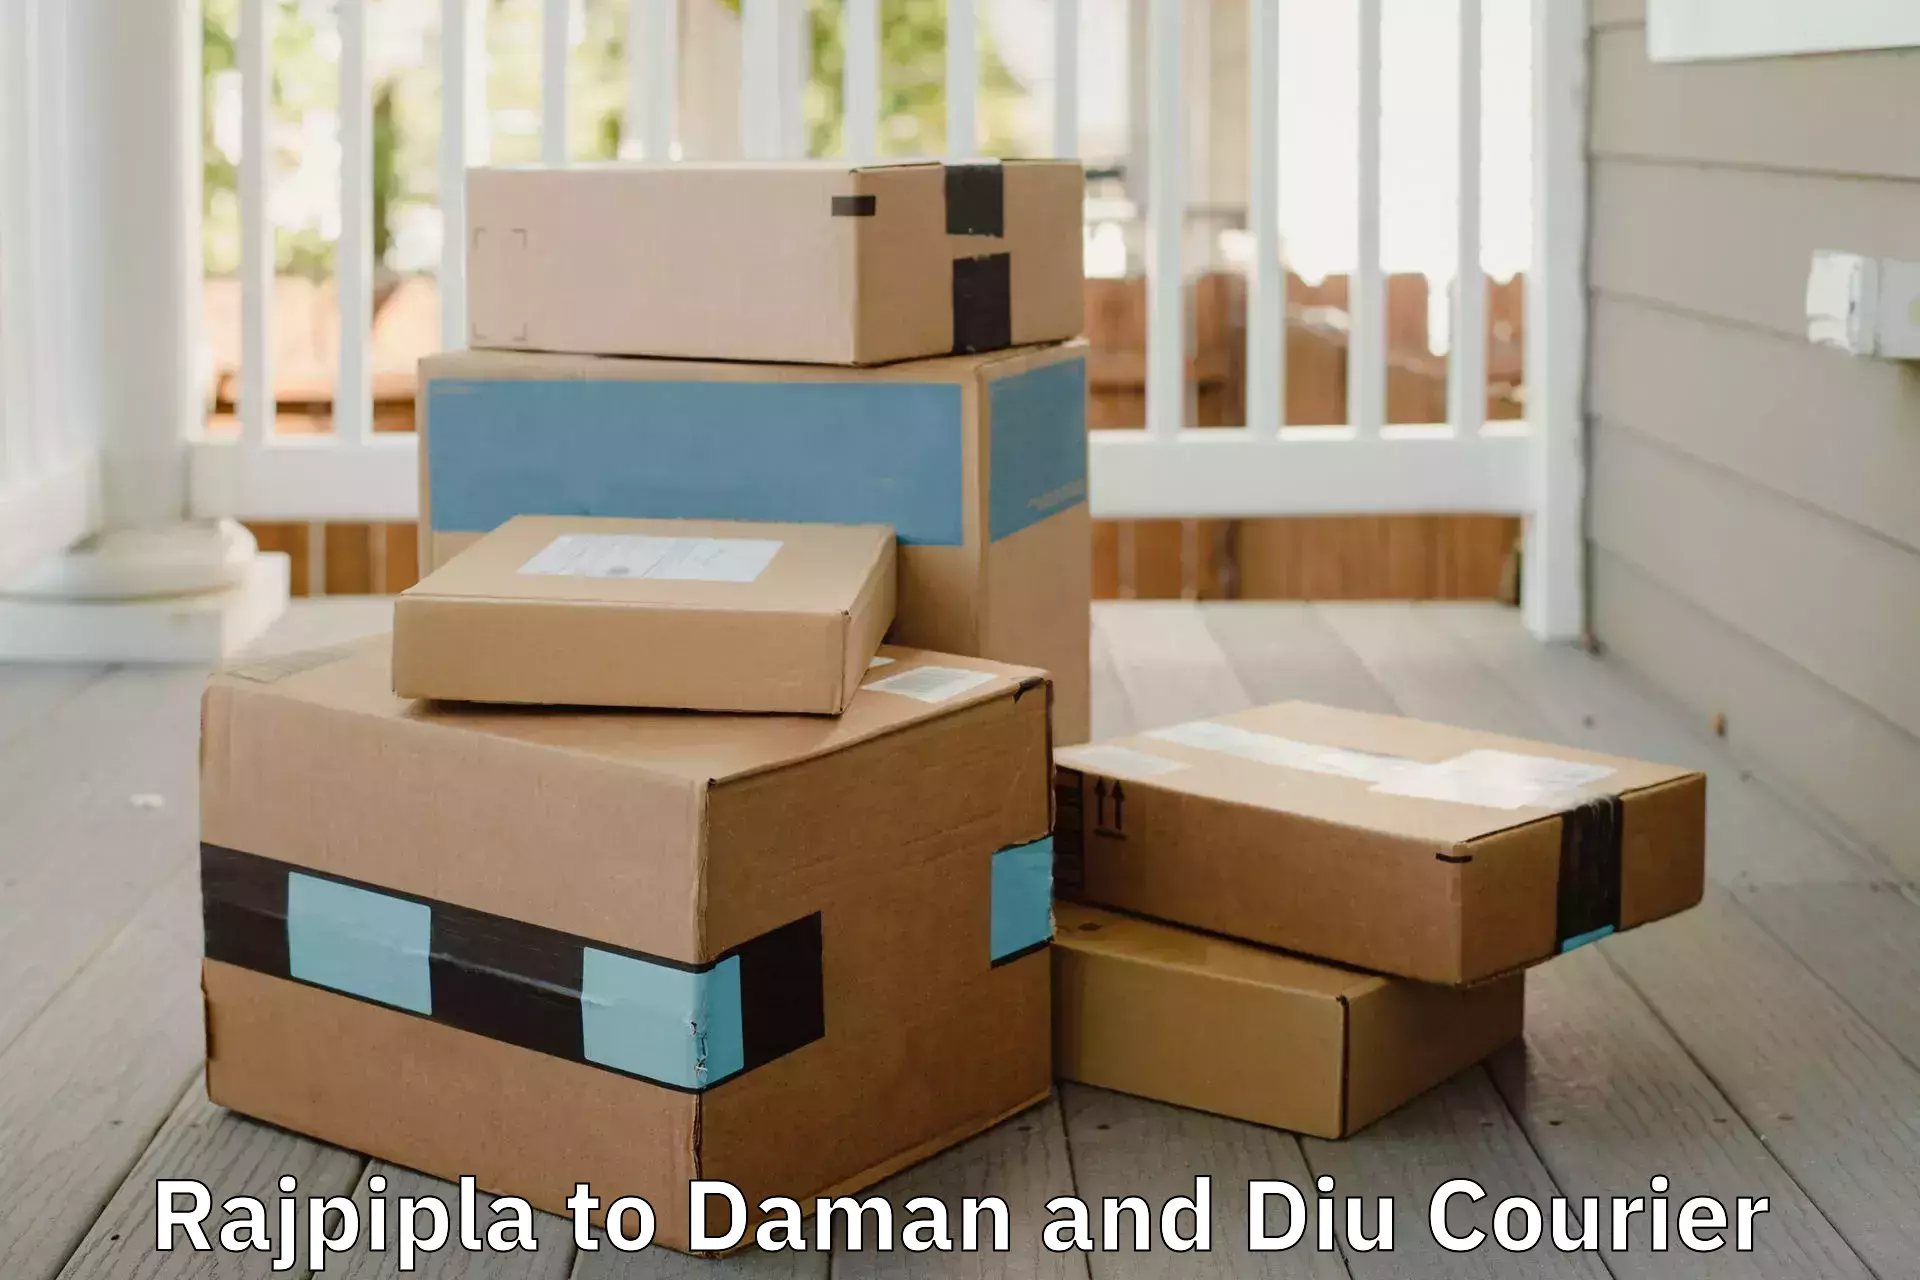 Moving and handling services in Rajpipla to Diu